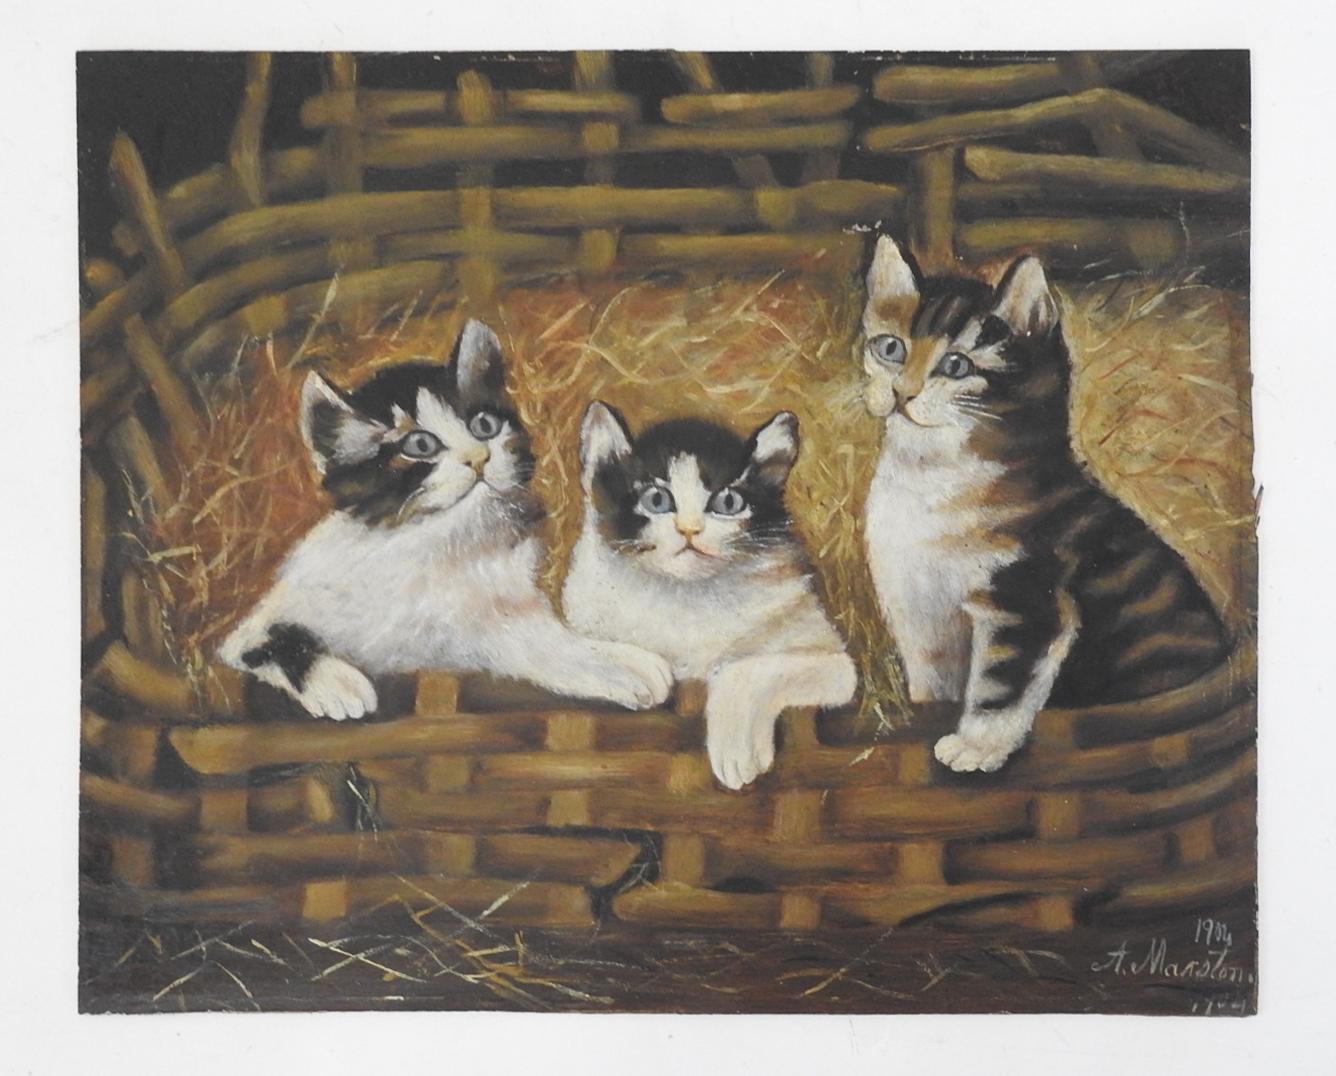 Antique 1904 oil on artist board folk art painting of three kittens in an old basket.  Signed A. Marston and dated 1904 lower right corner.  Note on old backing (Wendell Marston Waitt) Painted by his grandmother age 70 1903, Borne July 14 1884,